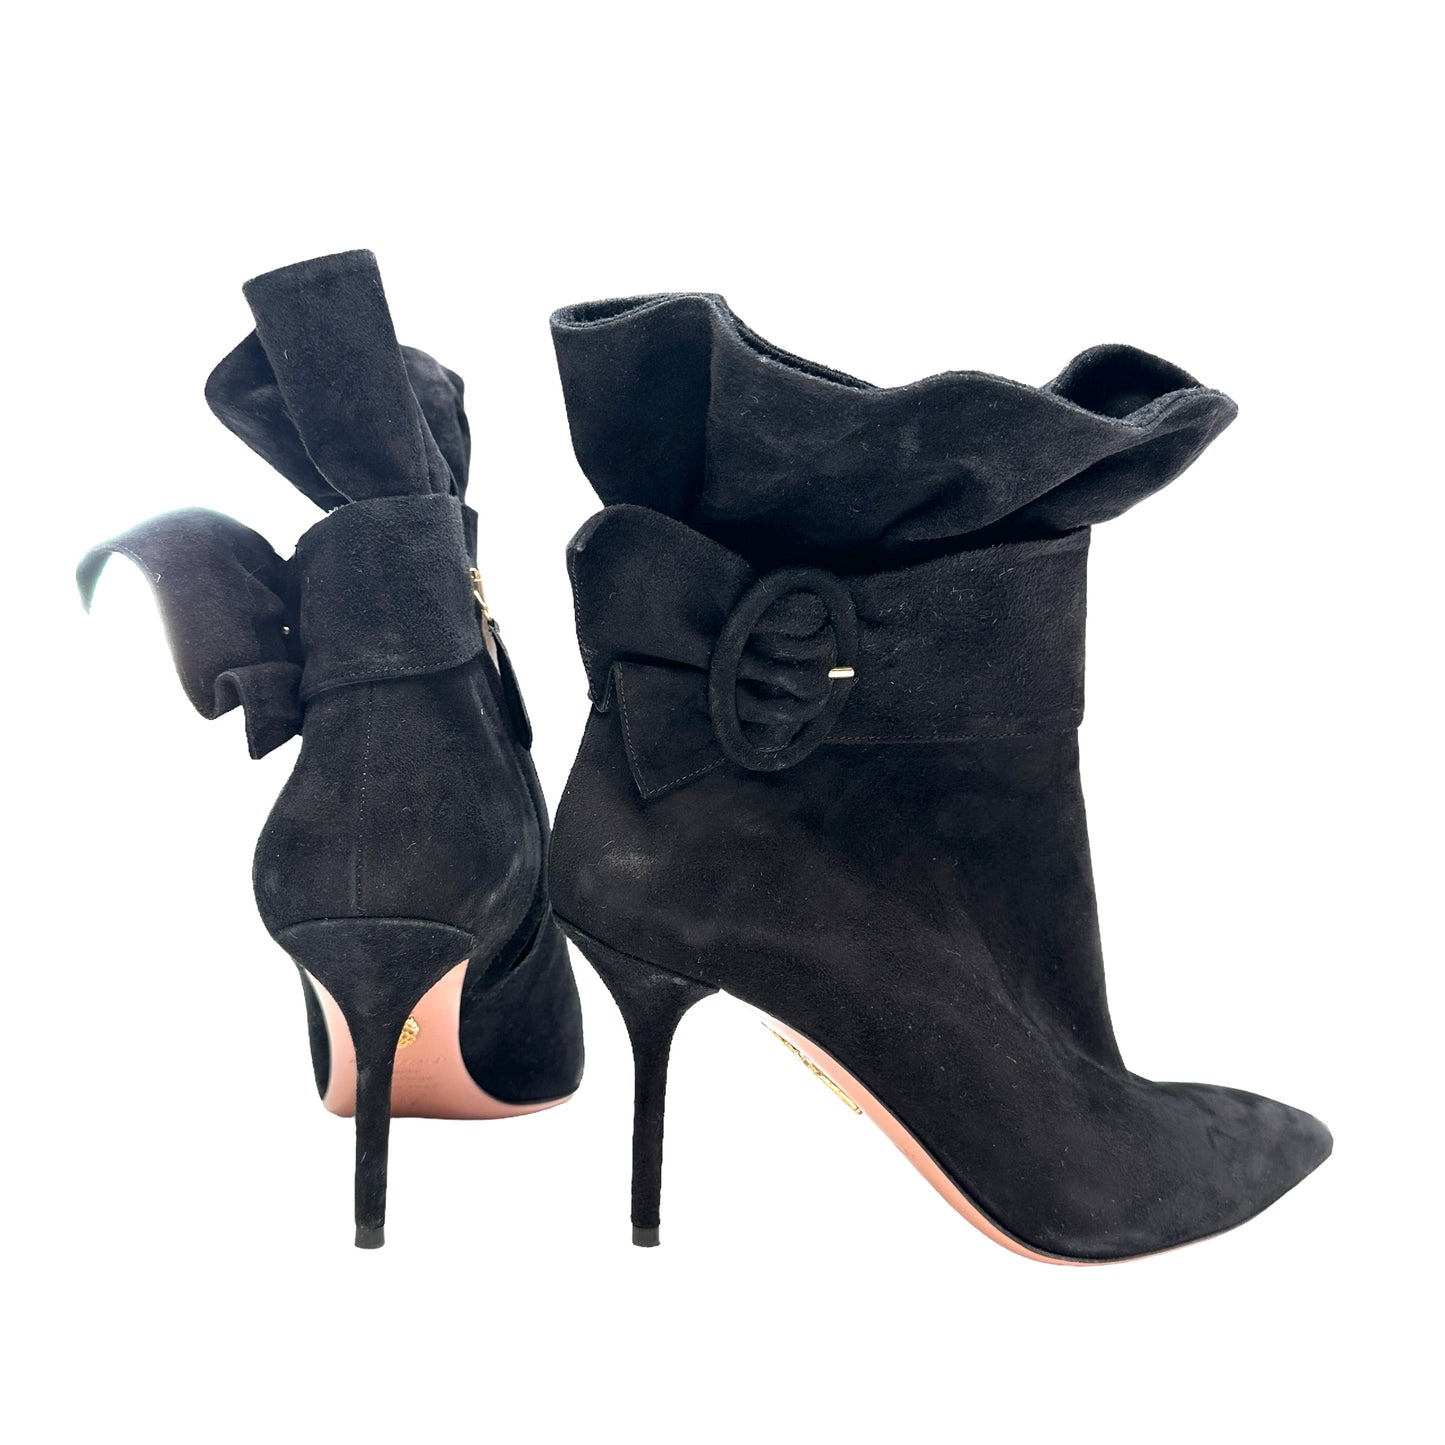 Black Suede Heeled Boots - 8